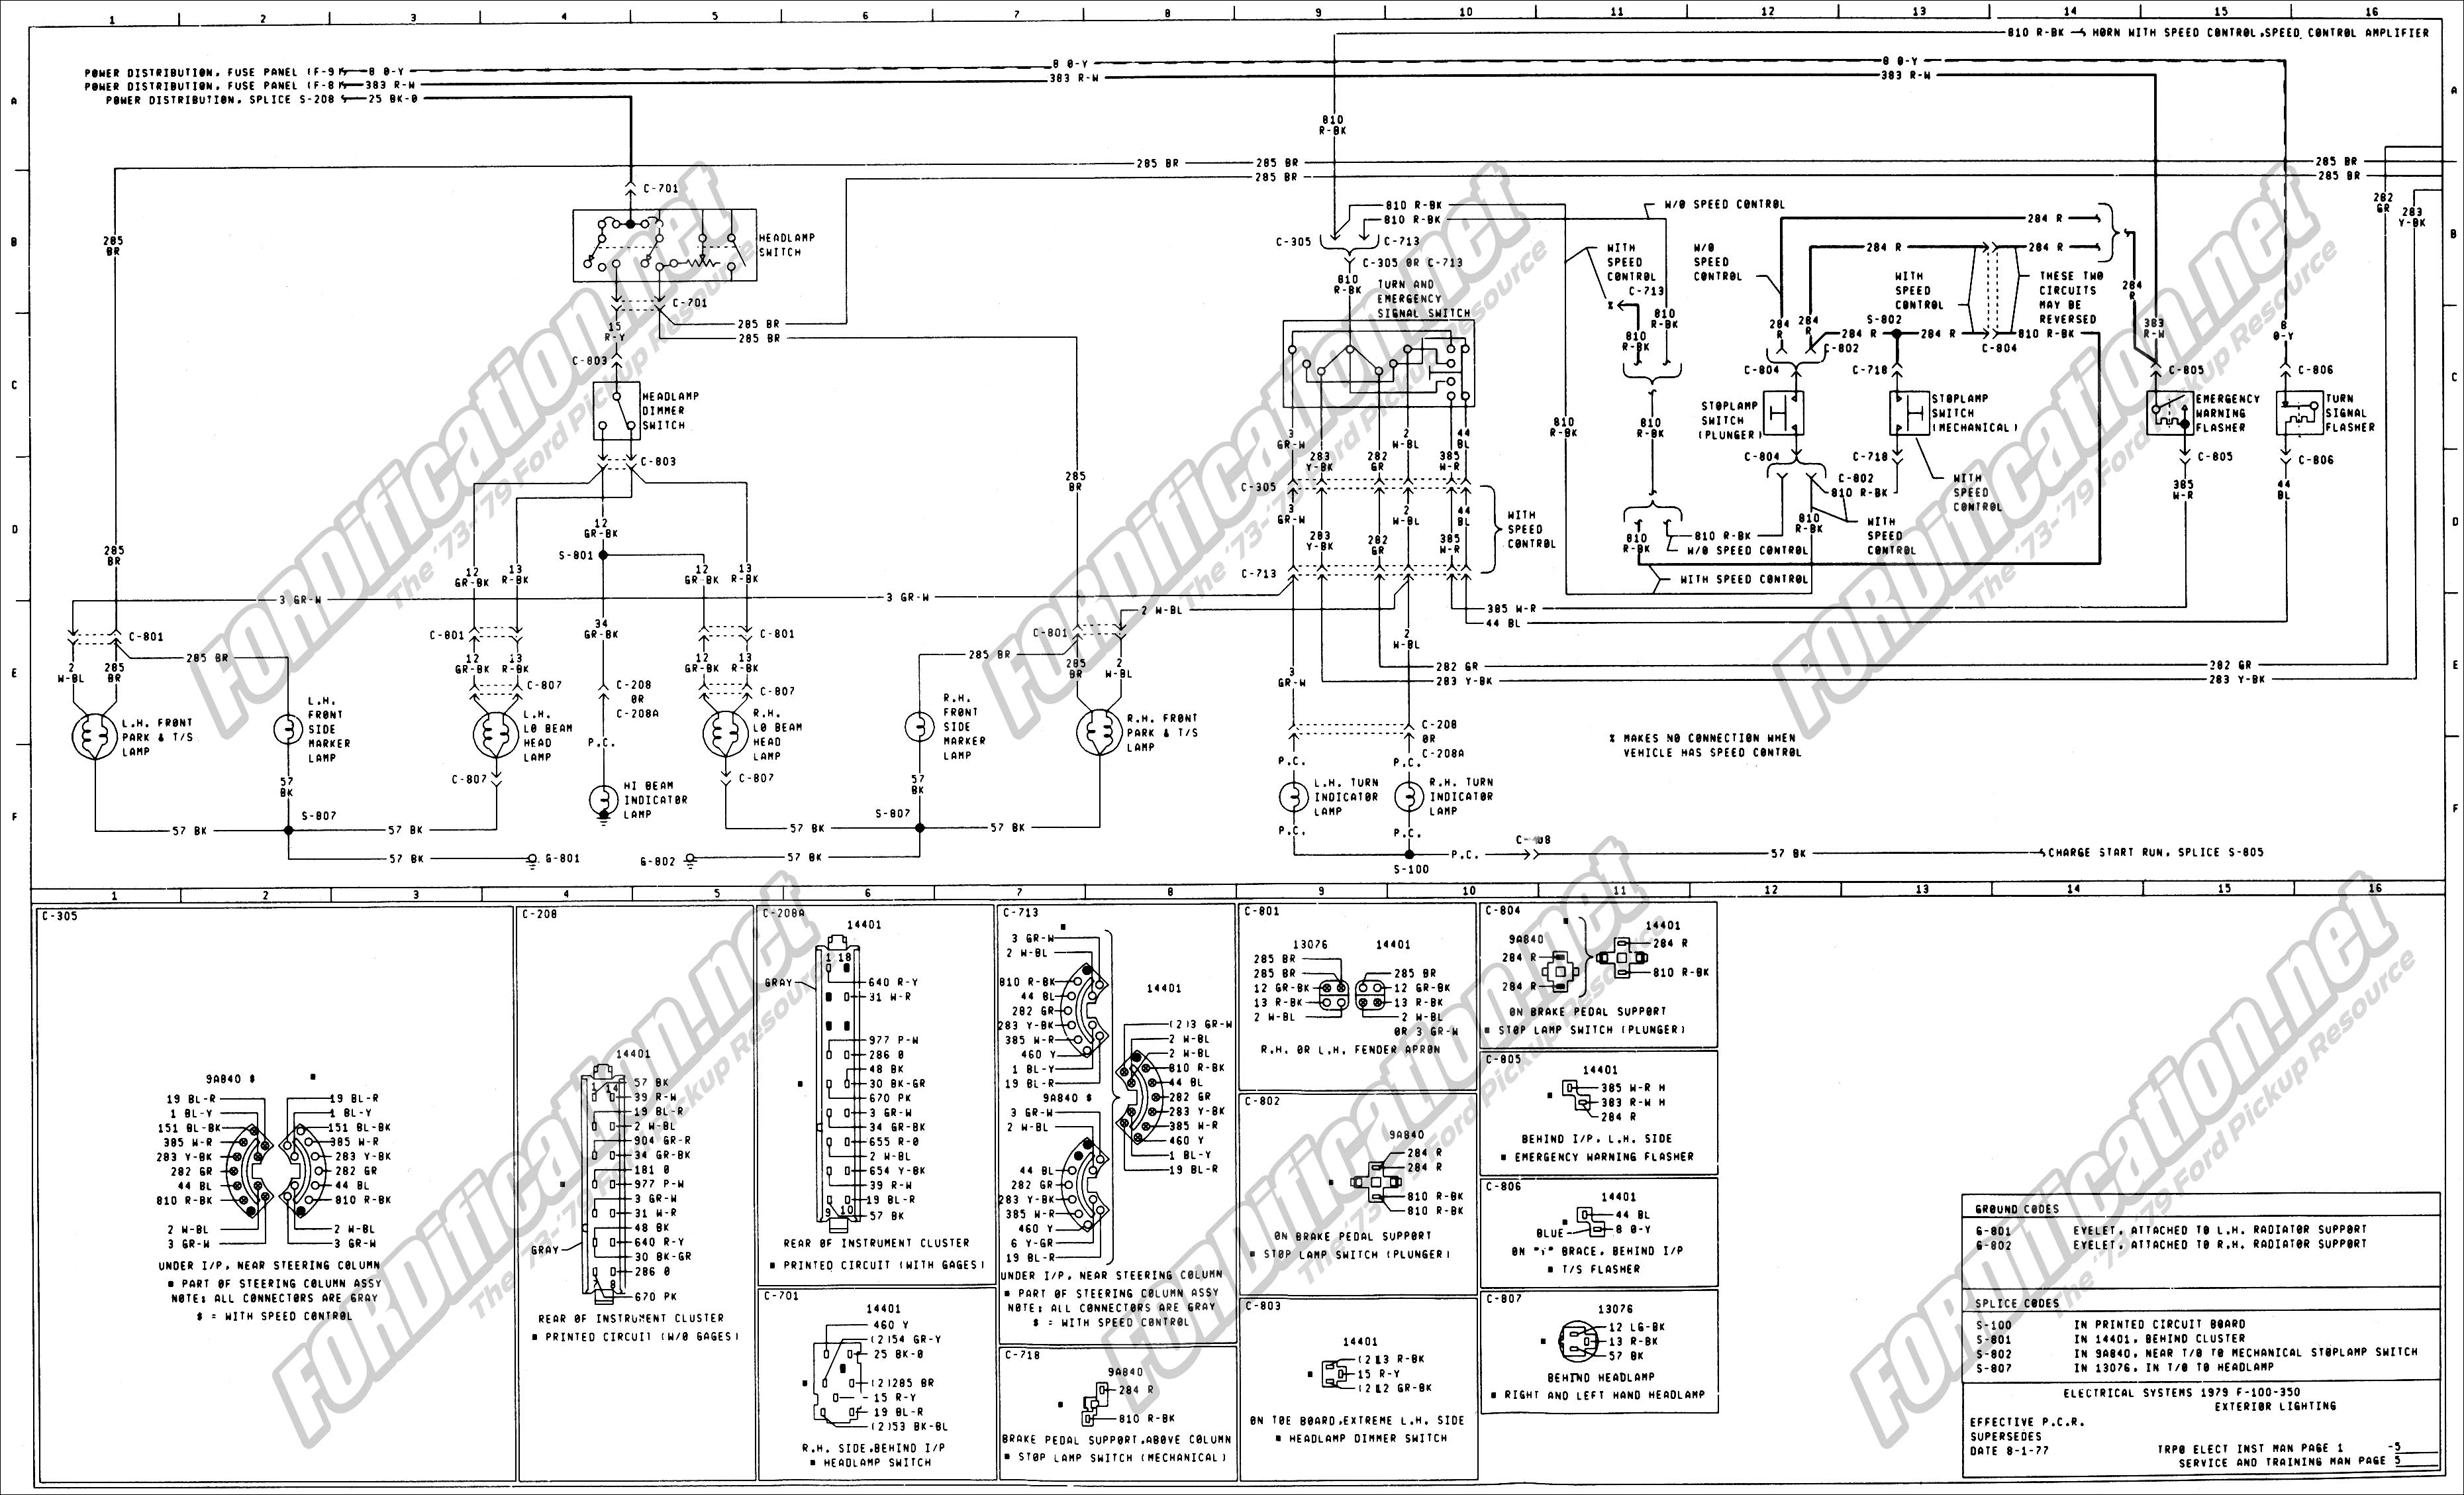 Wiring diagrams 1973 ford truck #8